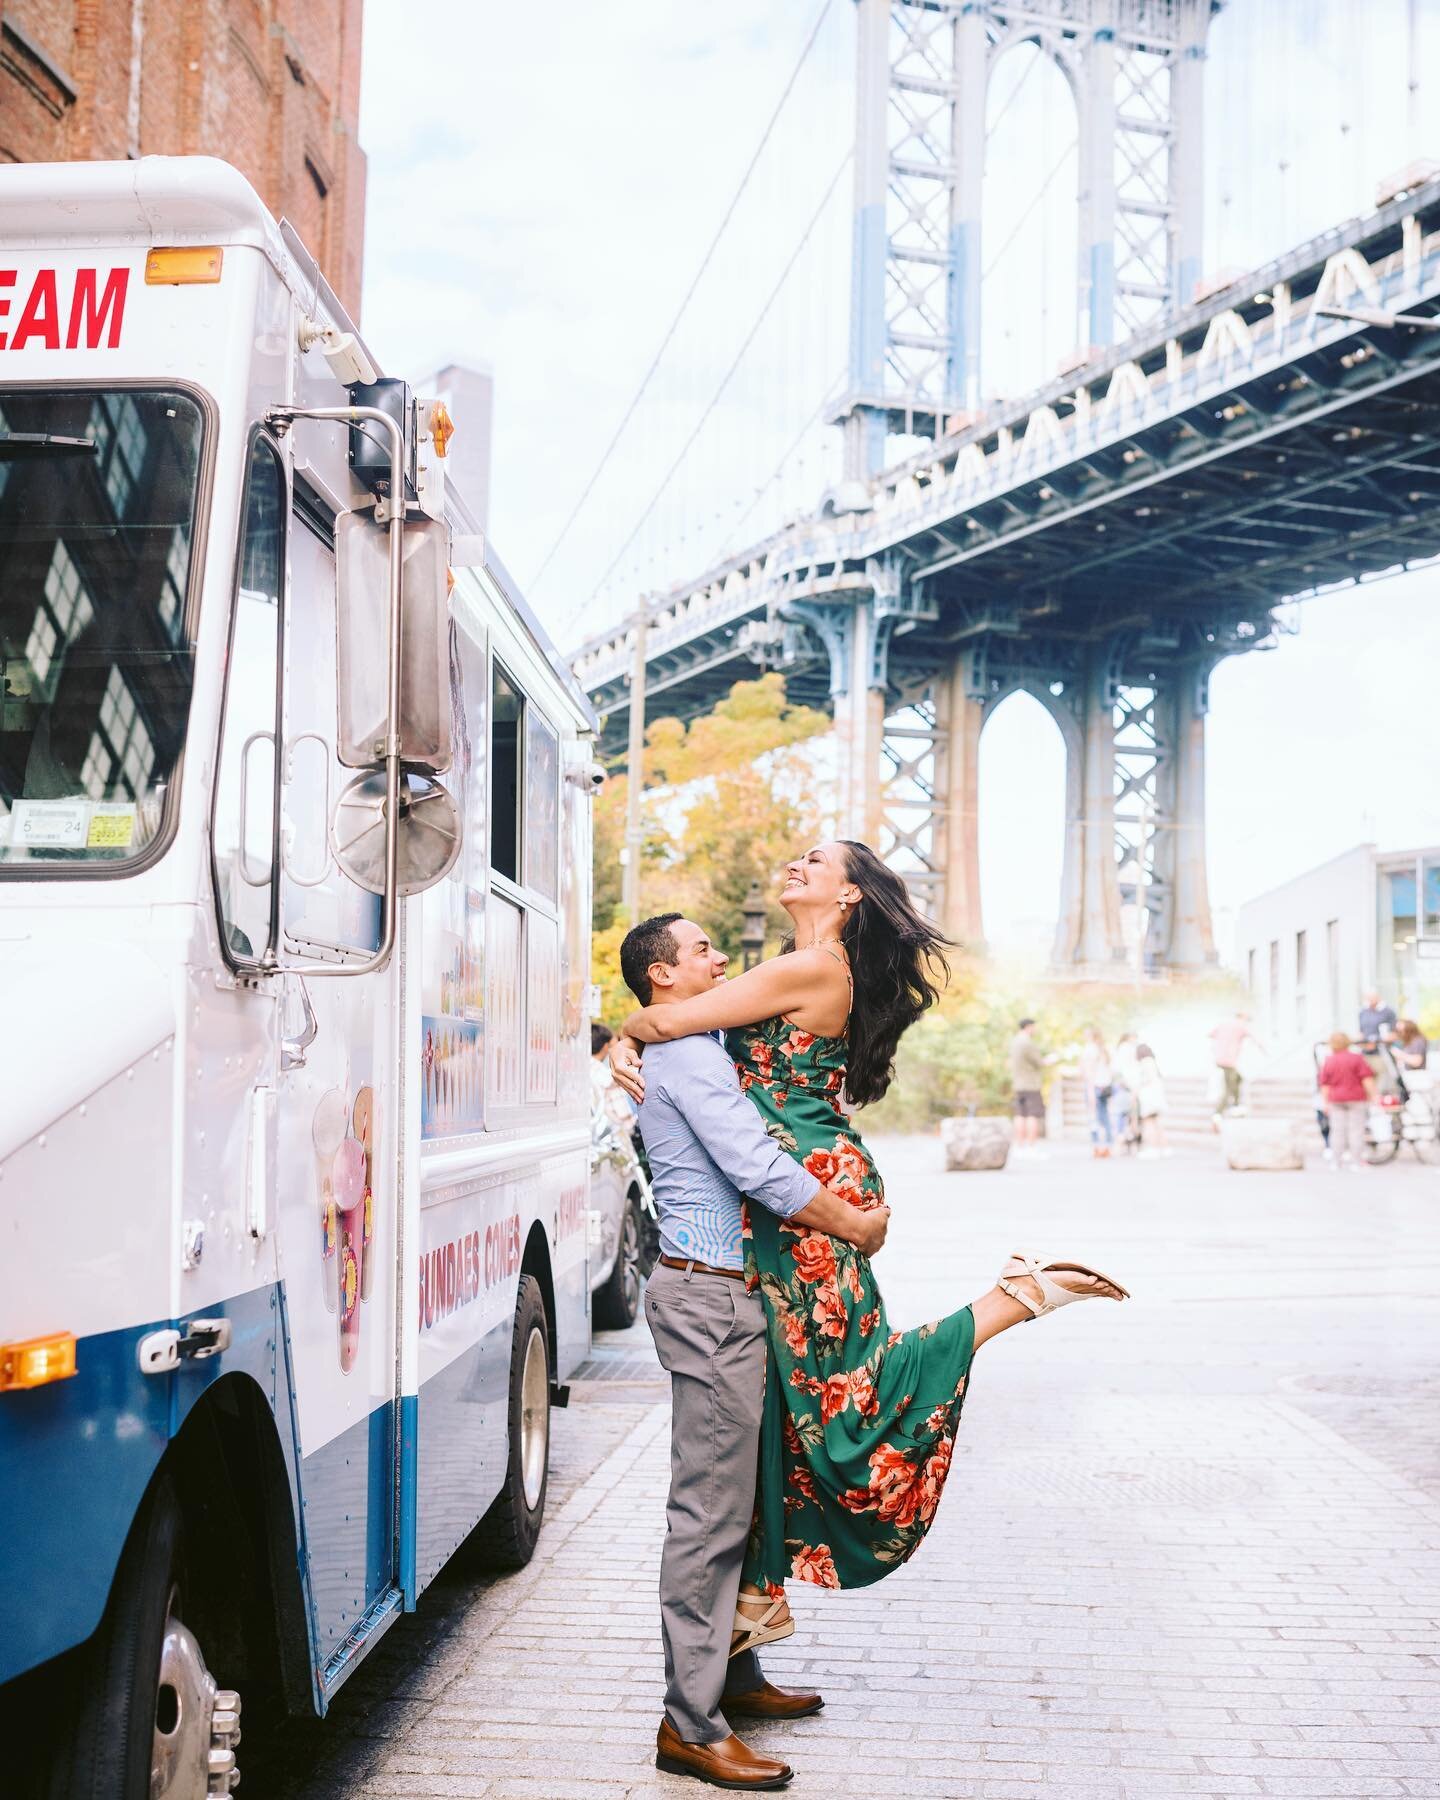 Summer in the city means sun bathing in the park, Mister Softee, outdoor cafes, lots of concerts and events outside, strolling the high line, sweltering in the subway, happier looking New Yorkers, crowds of people and every language you could imagine